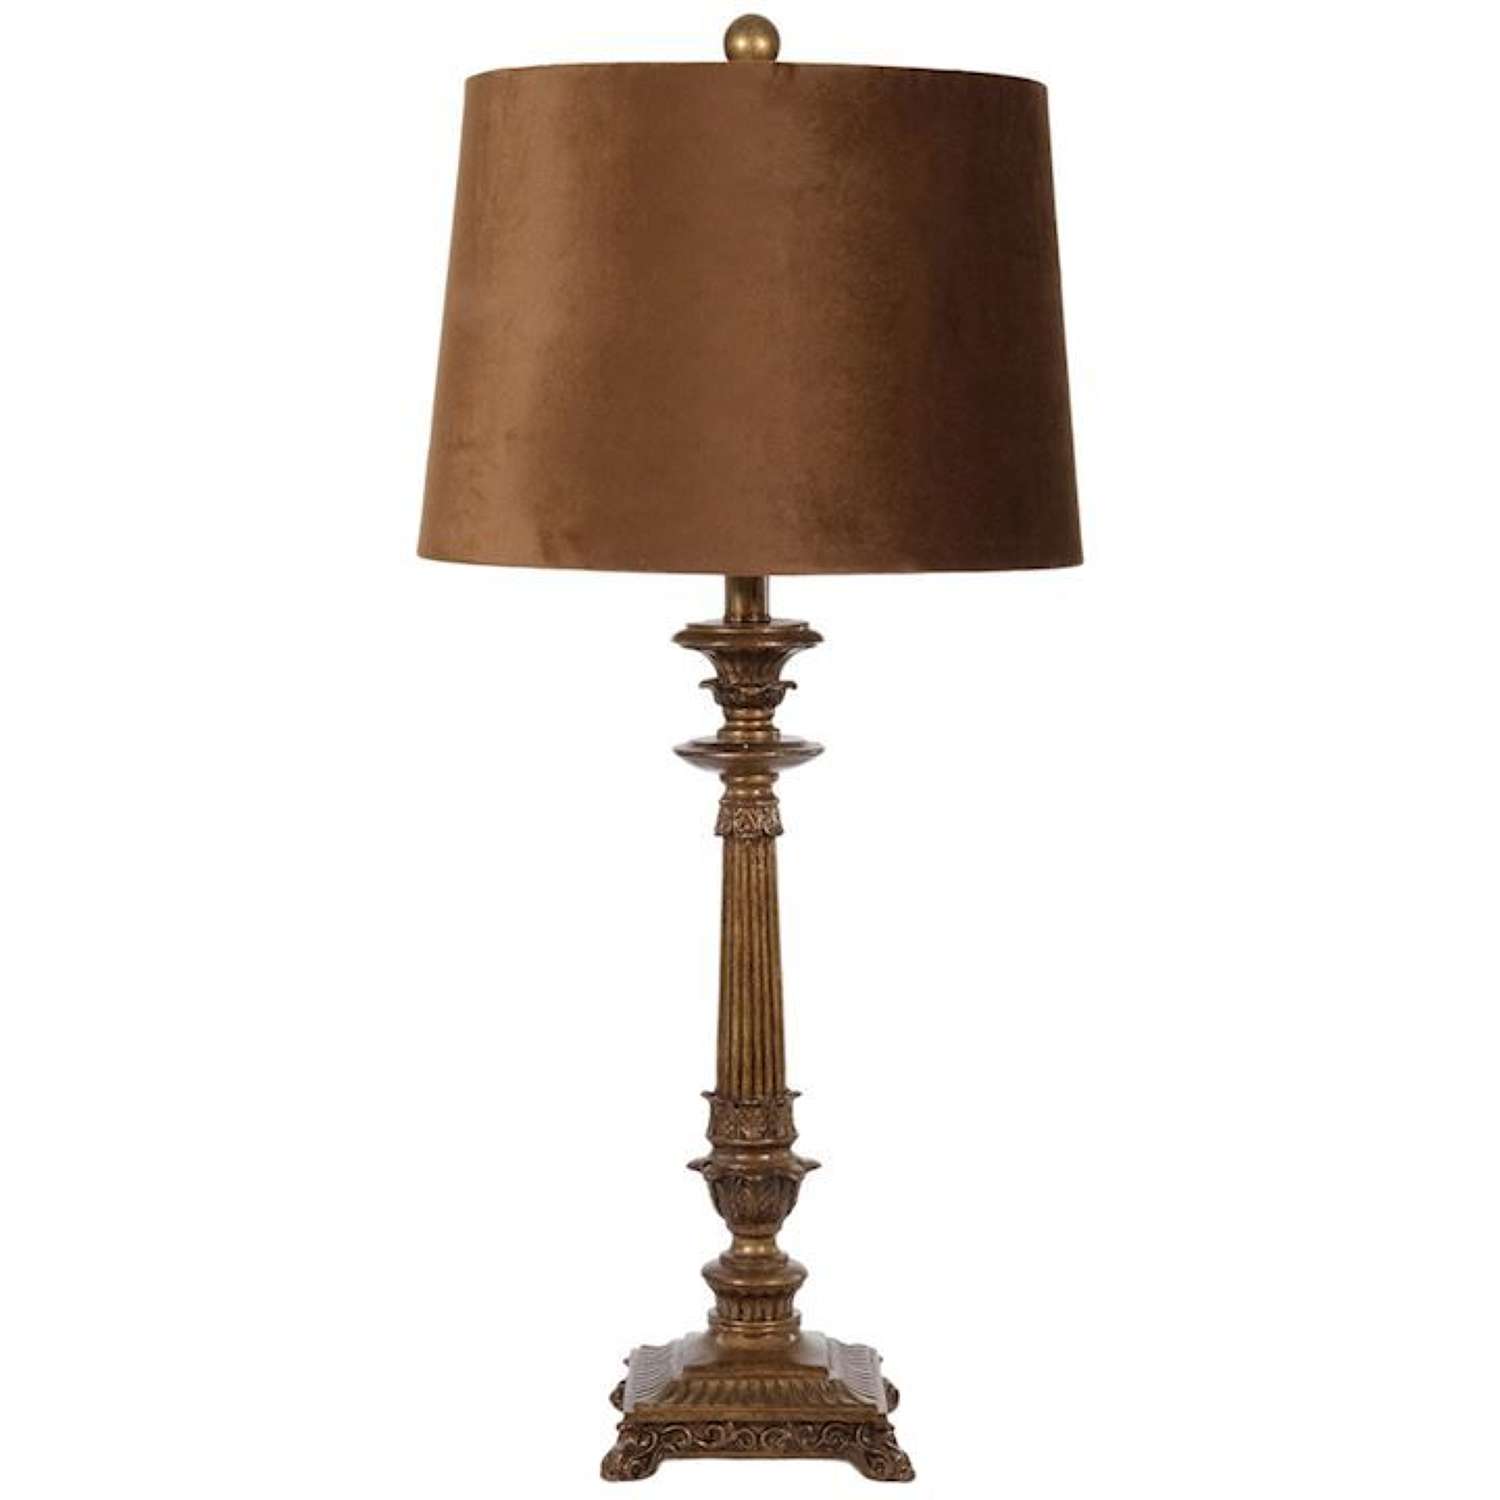 Monaco Lamp Antique  Burnished Gold Lamp With Dark Biscuit Shade.